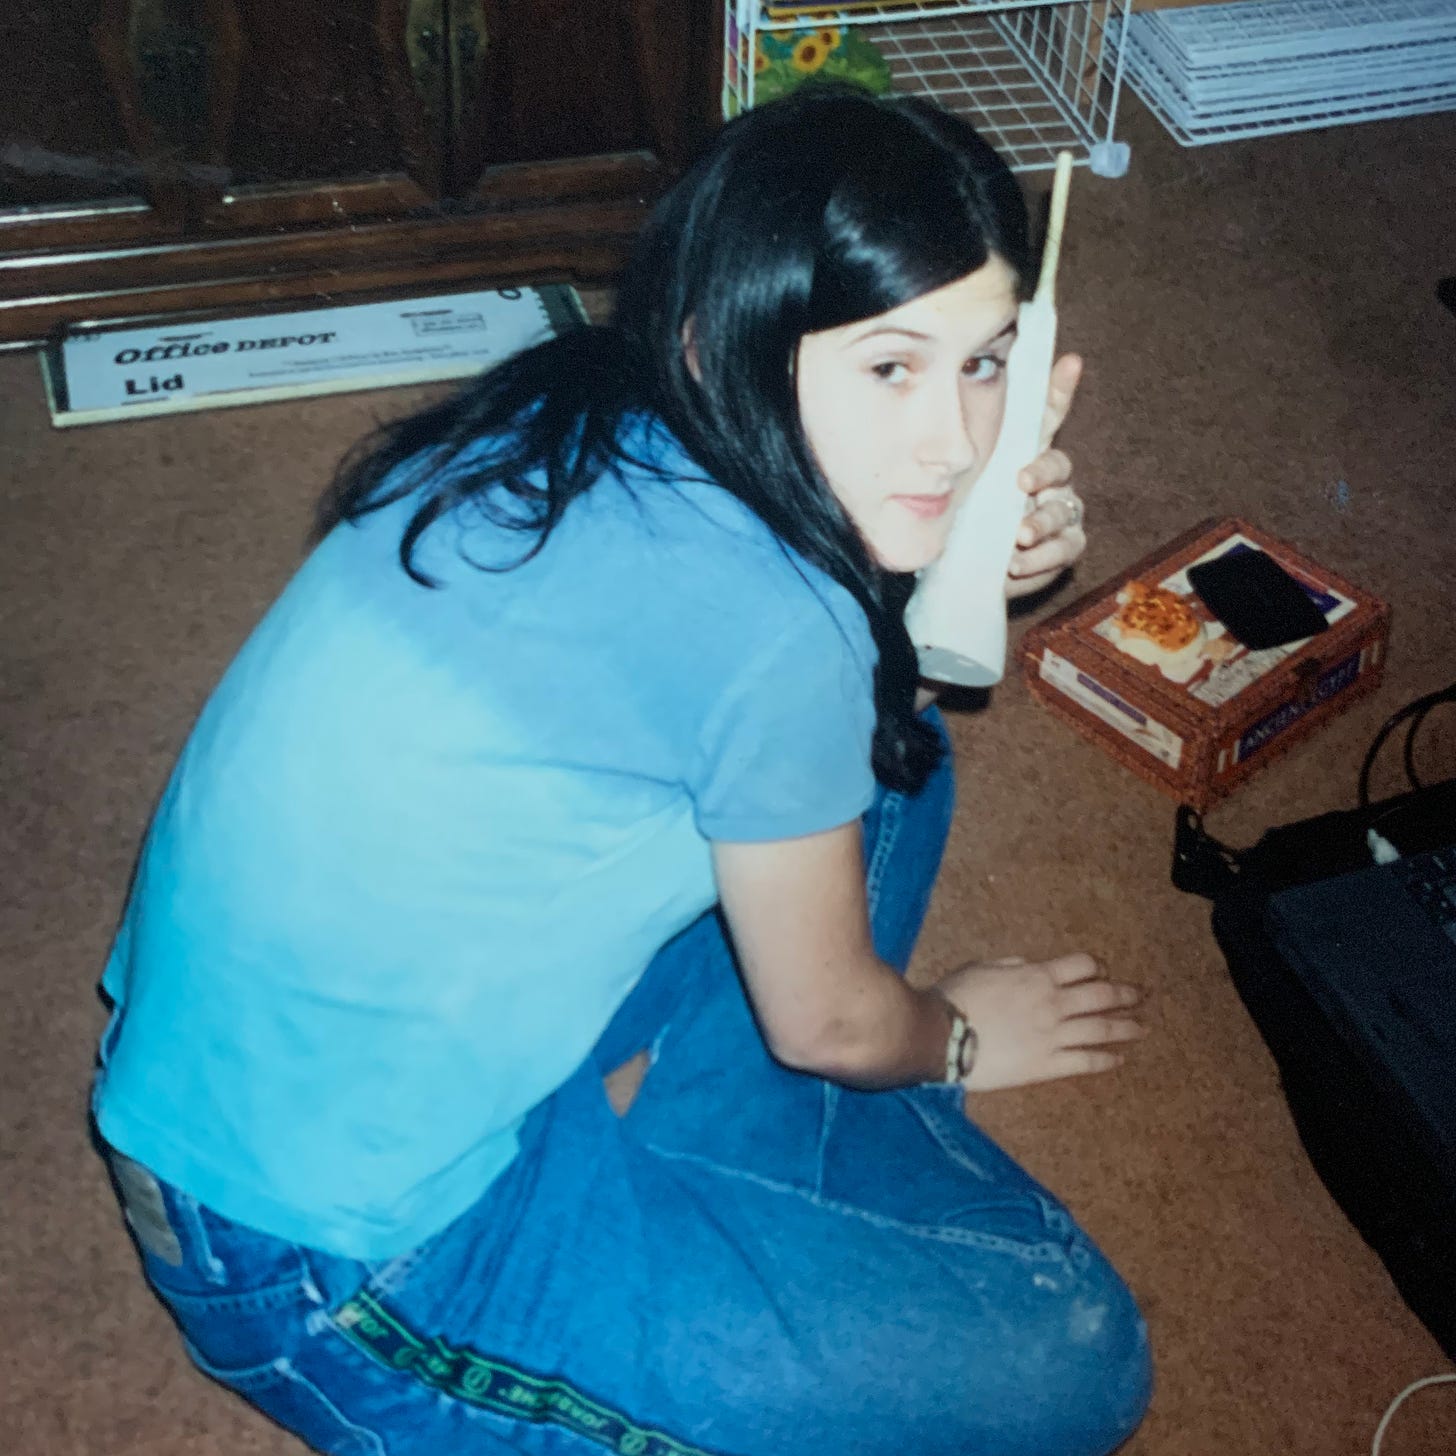 Teenage Lyric is in a blue shirt and blue jeans, scowling at someone who is taking their picture from behind as they talk on the phone. 